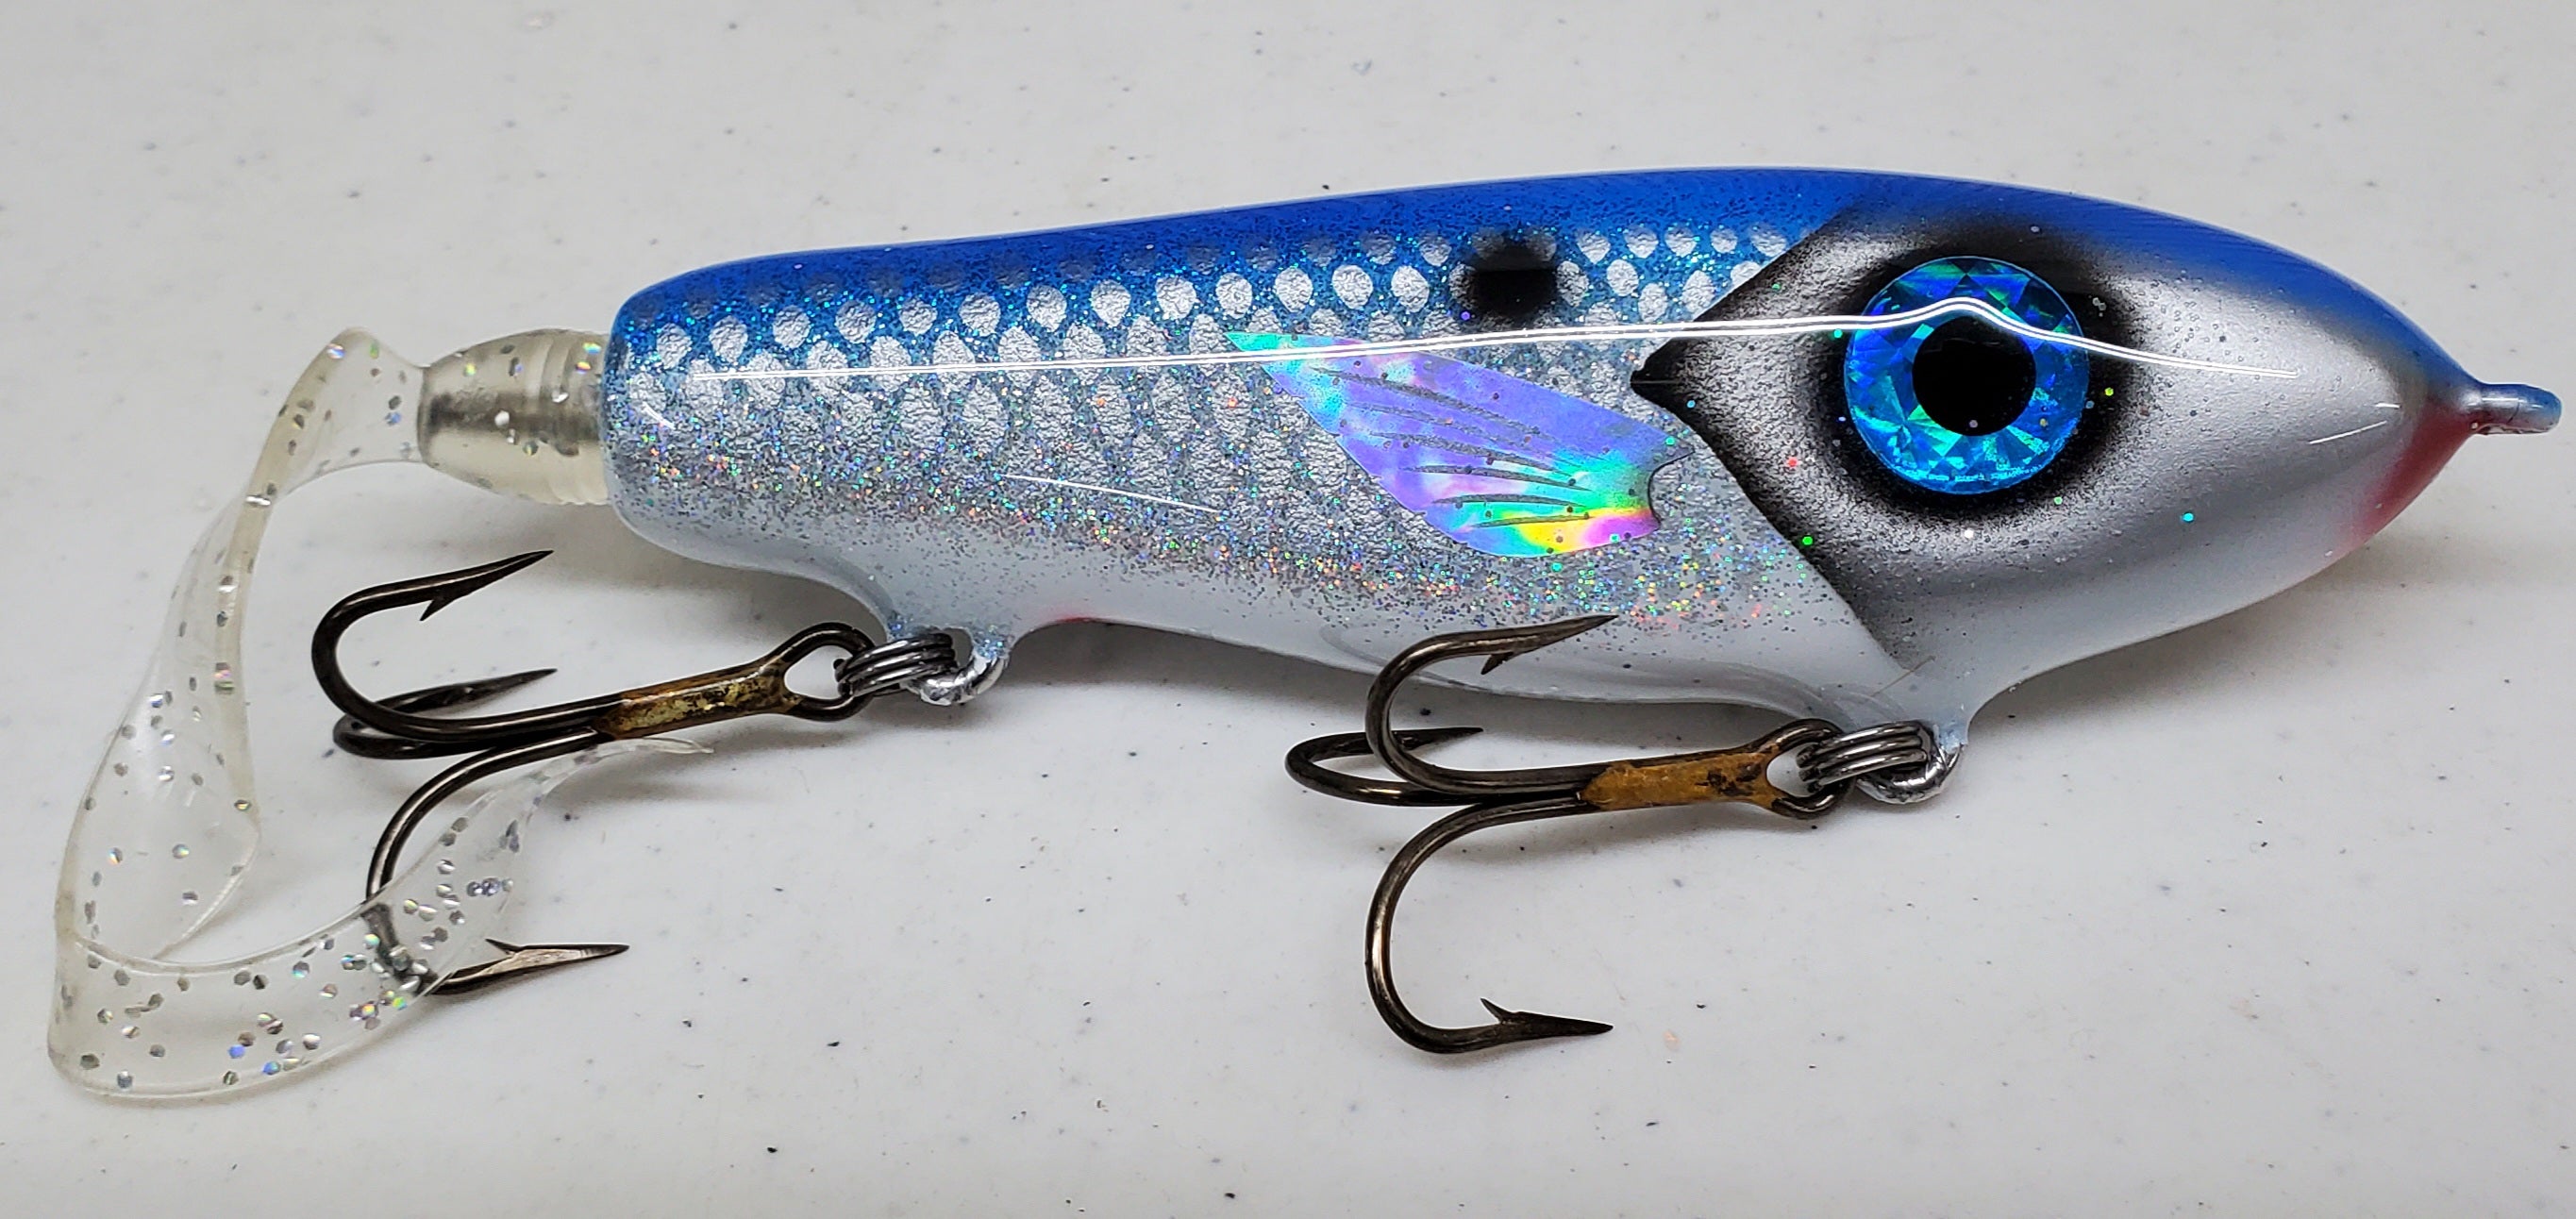 Axia Glide Lures 9cm - £5.99